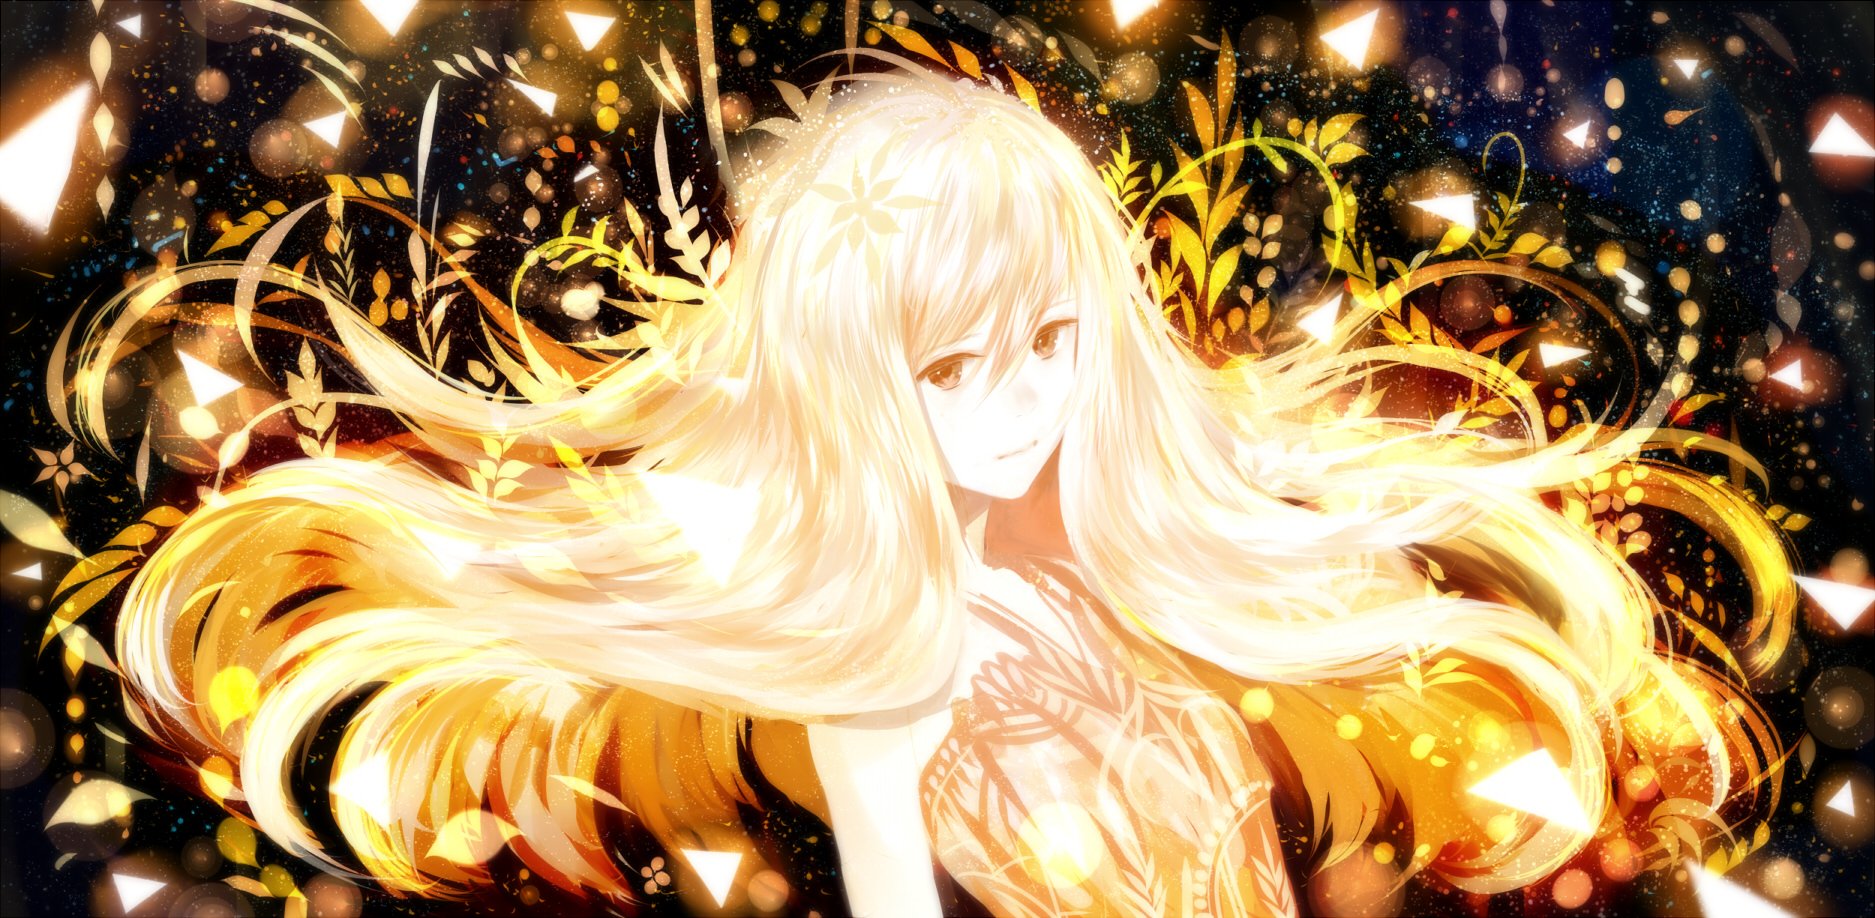 original characters Long hair Blonde Anime Anime girls Yellow eyes  Sunset Sweater Skirt HD Wallpapers  Desktop and Mobile Images  Photos